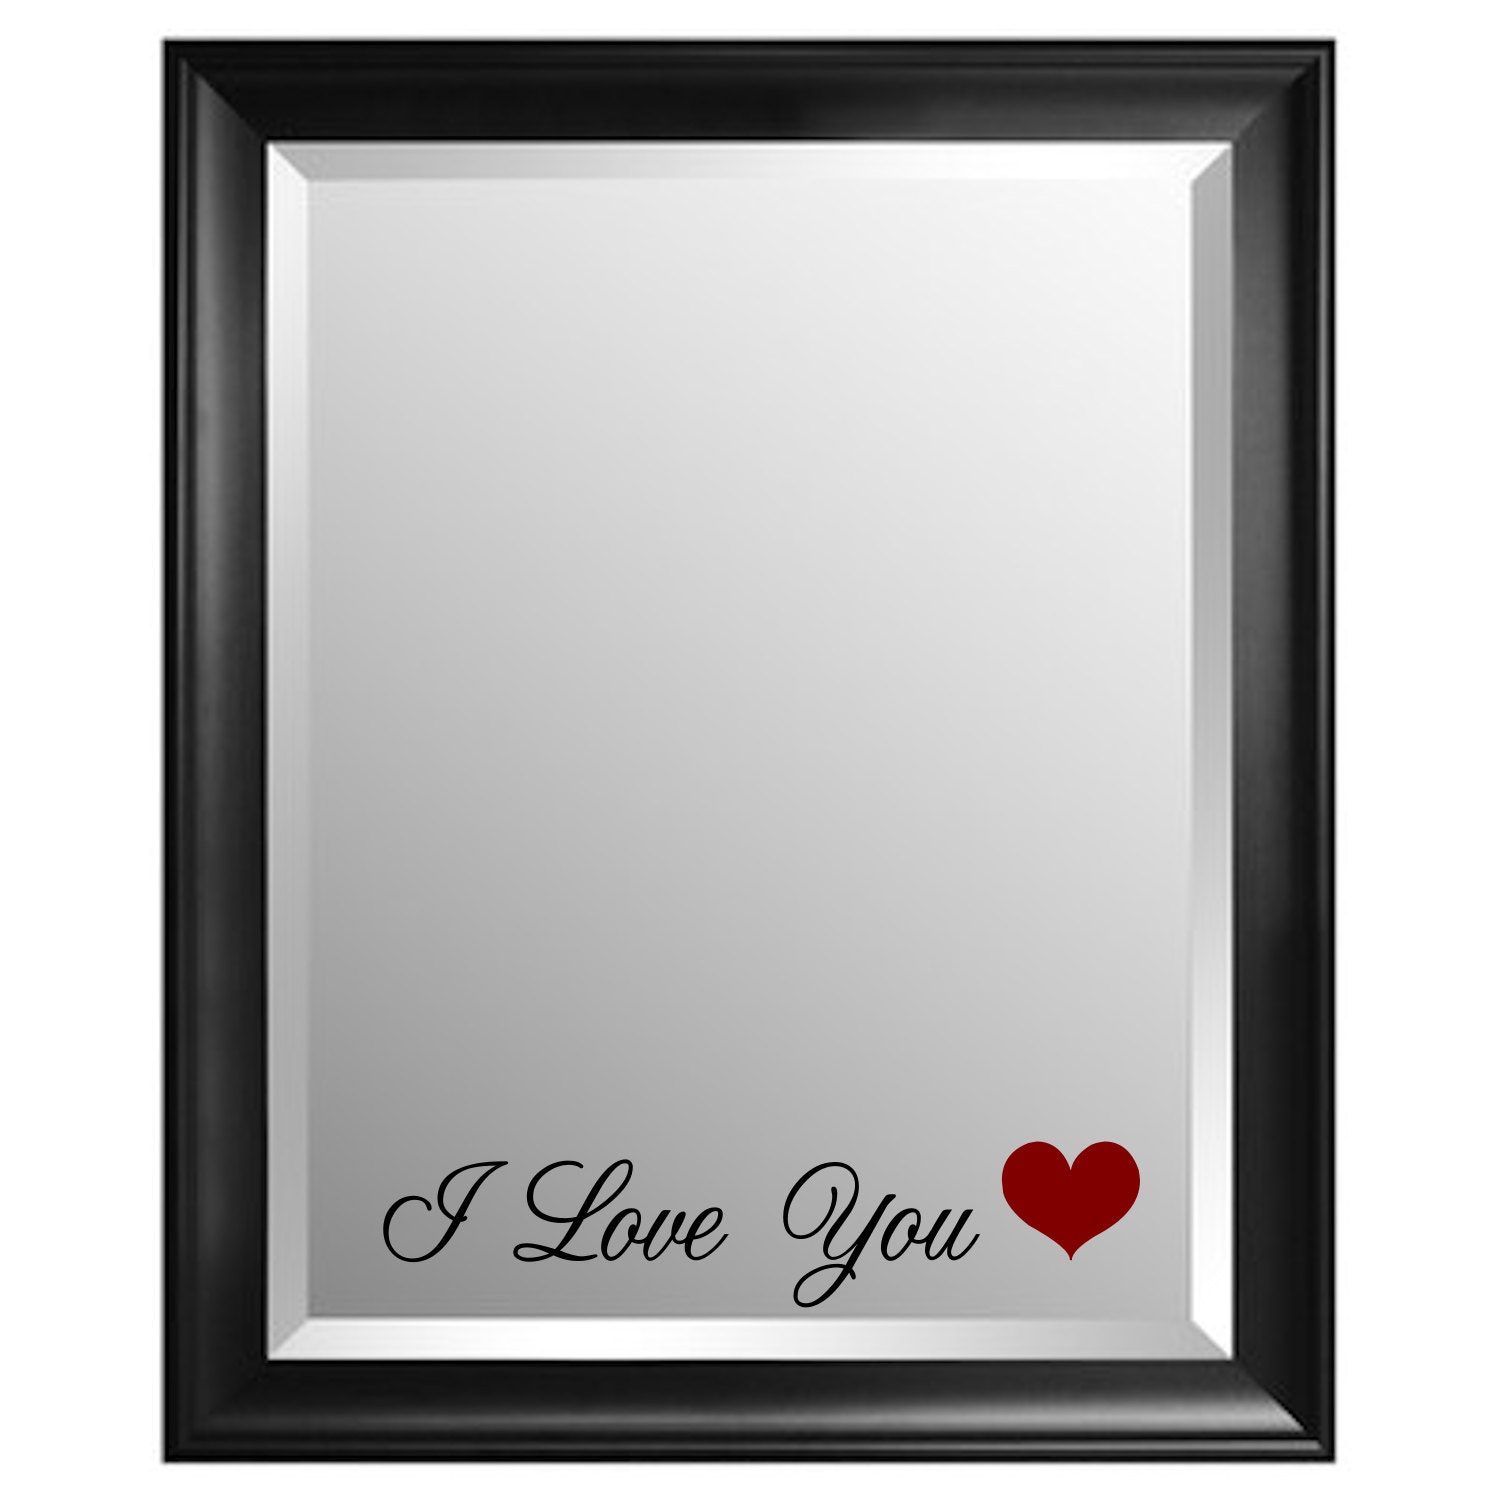 I Love You Mirror Decal 7568